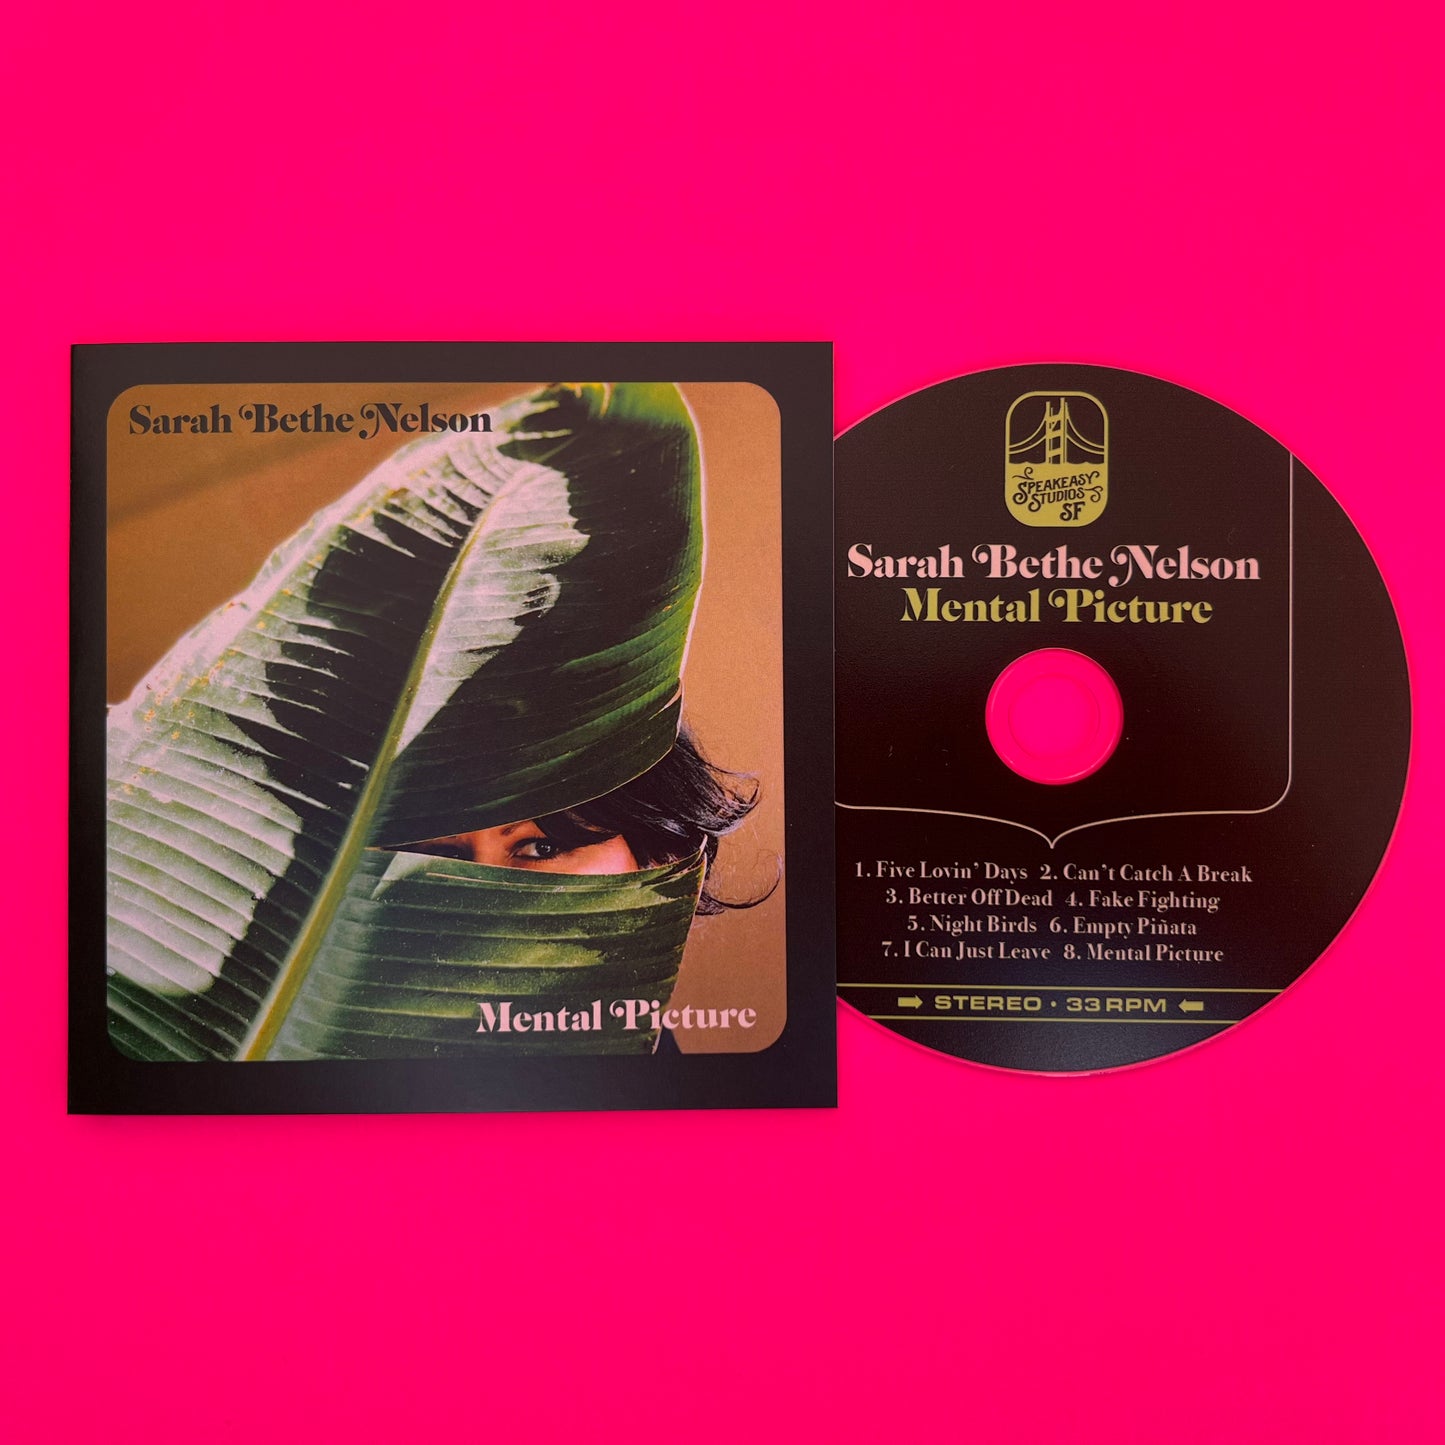 Speakeasy 003 - ‘Mental Picture’ CD by Sarah Bethe Nelson